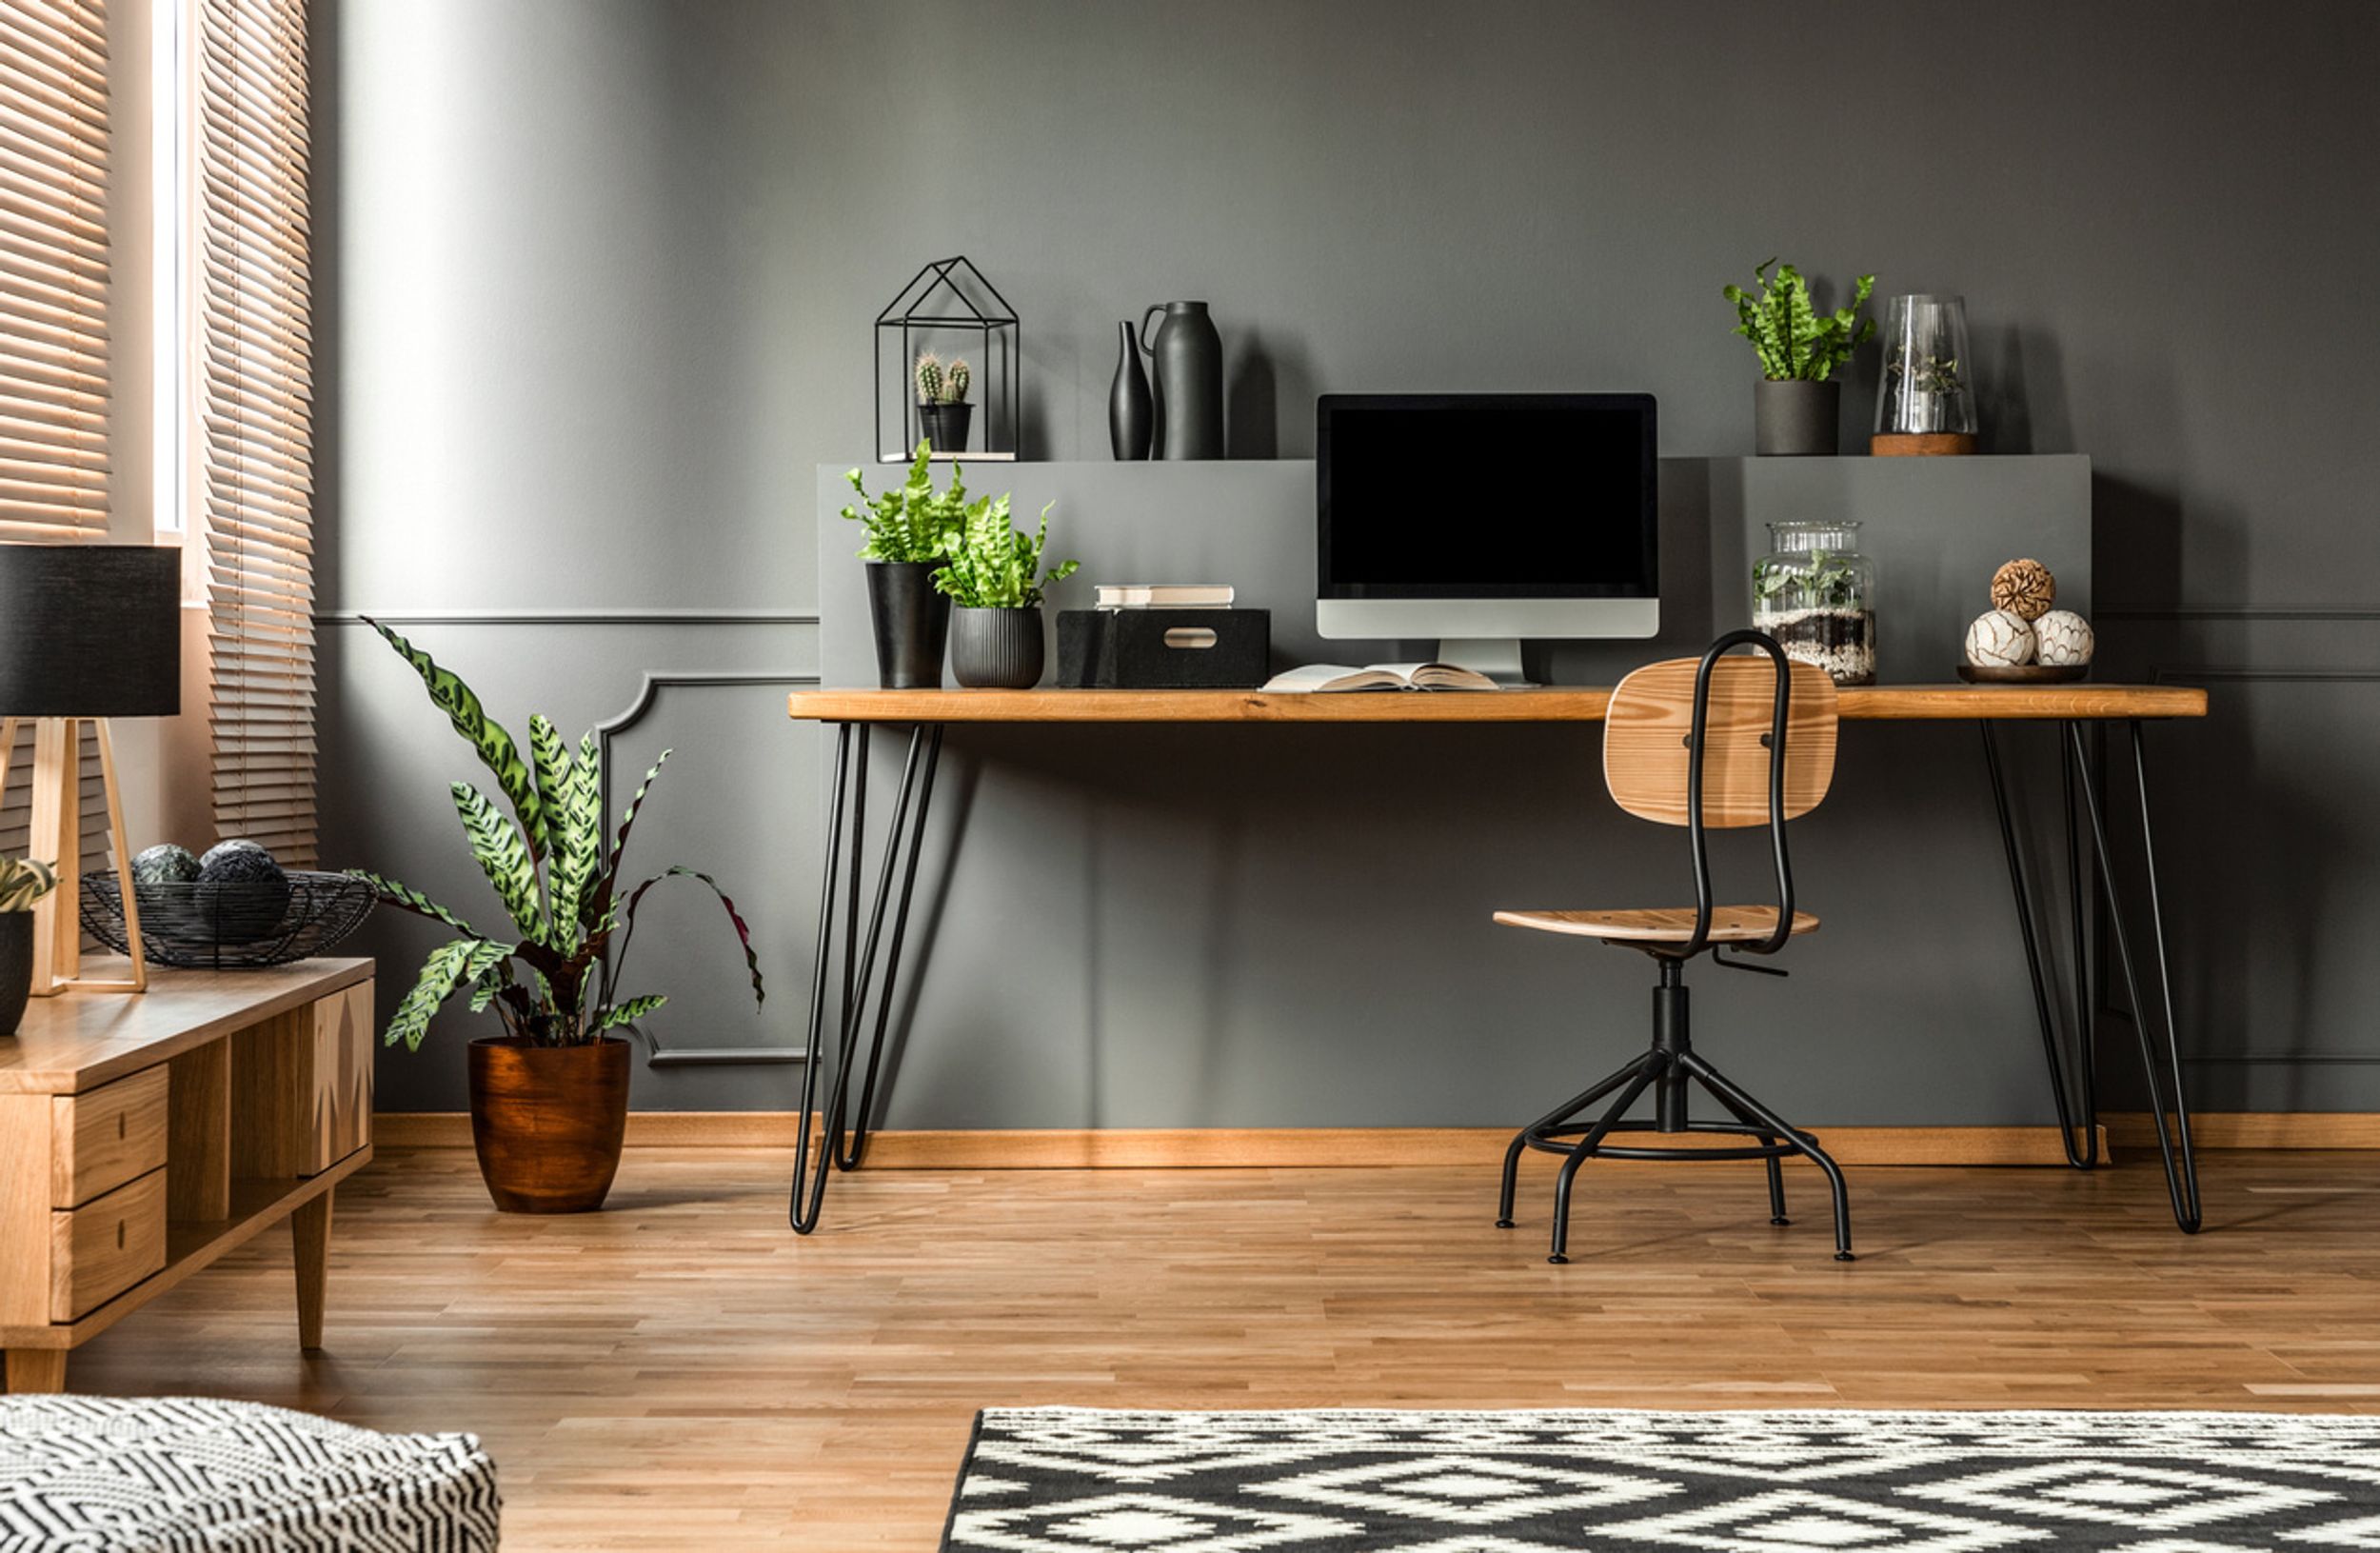 Boost Your Productivity With These (Home) Office Design Tweaks